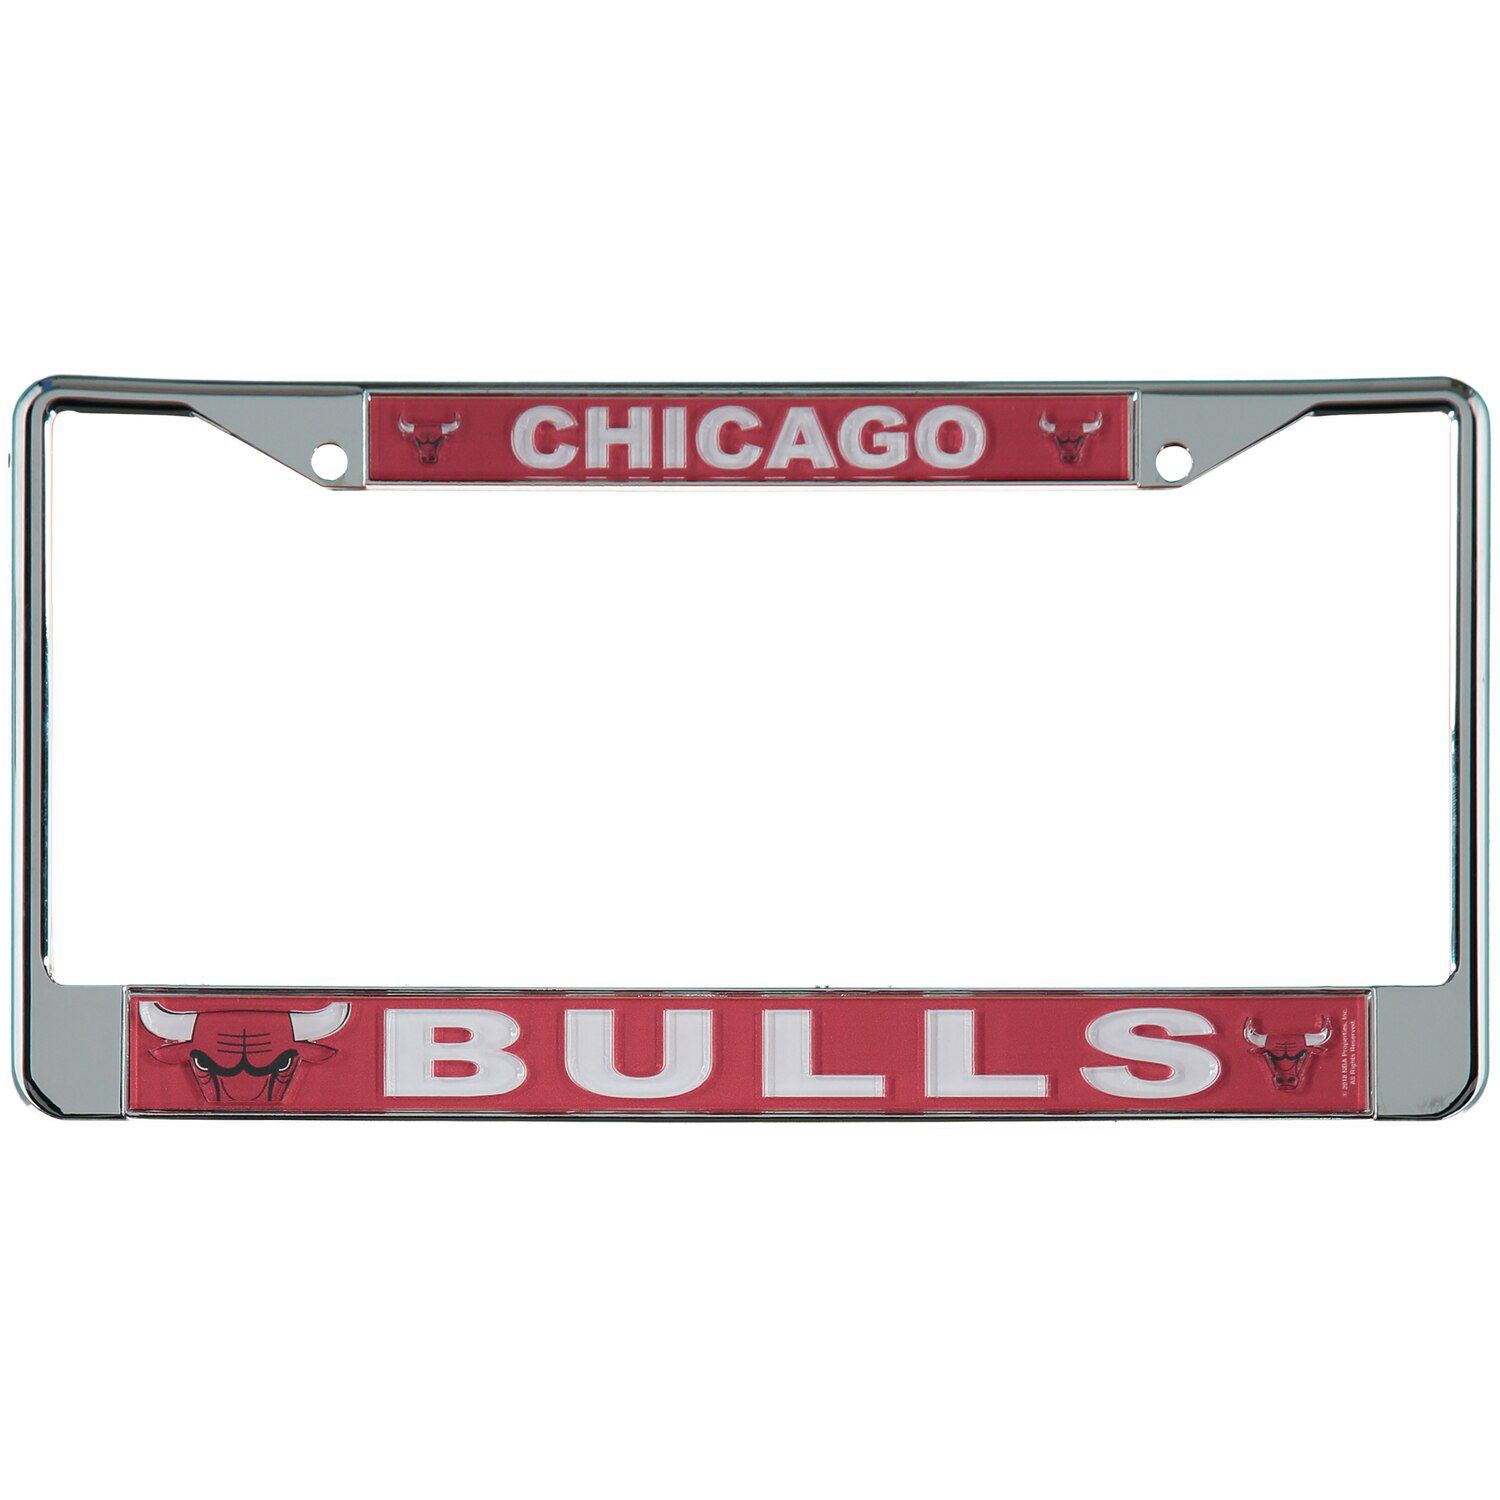 Image for Unbranded Chicago Bulls Acrylic License Plate Frame at Kohl's.